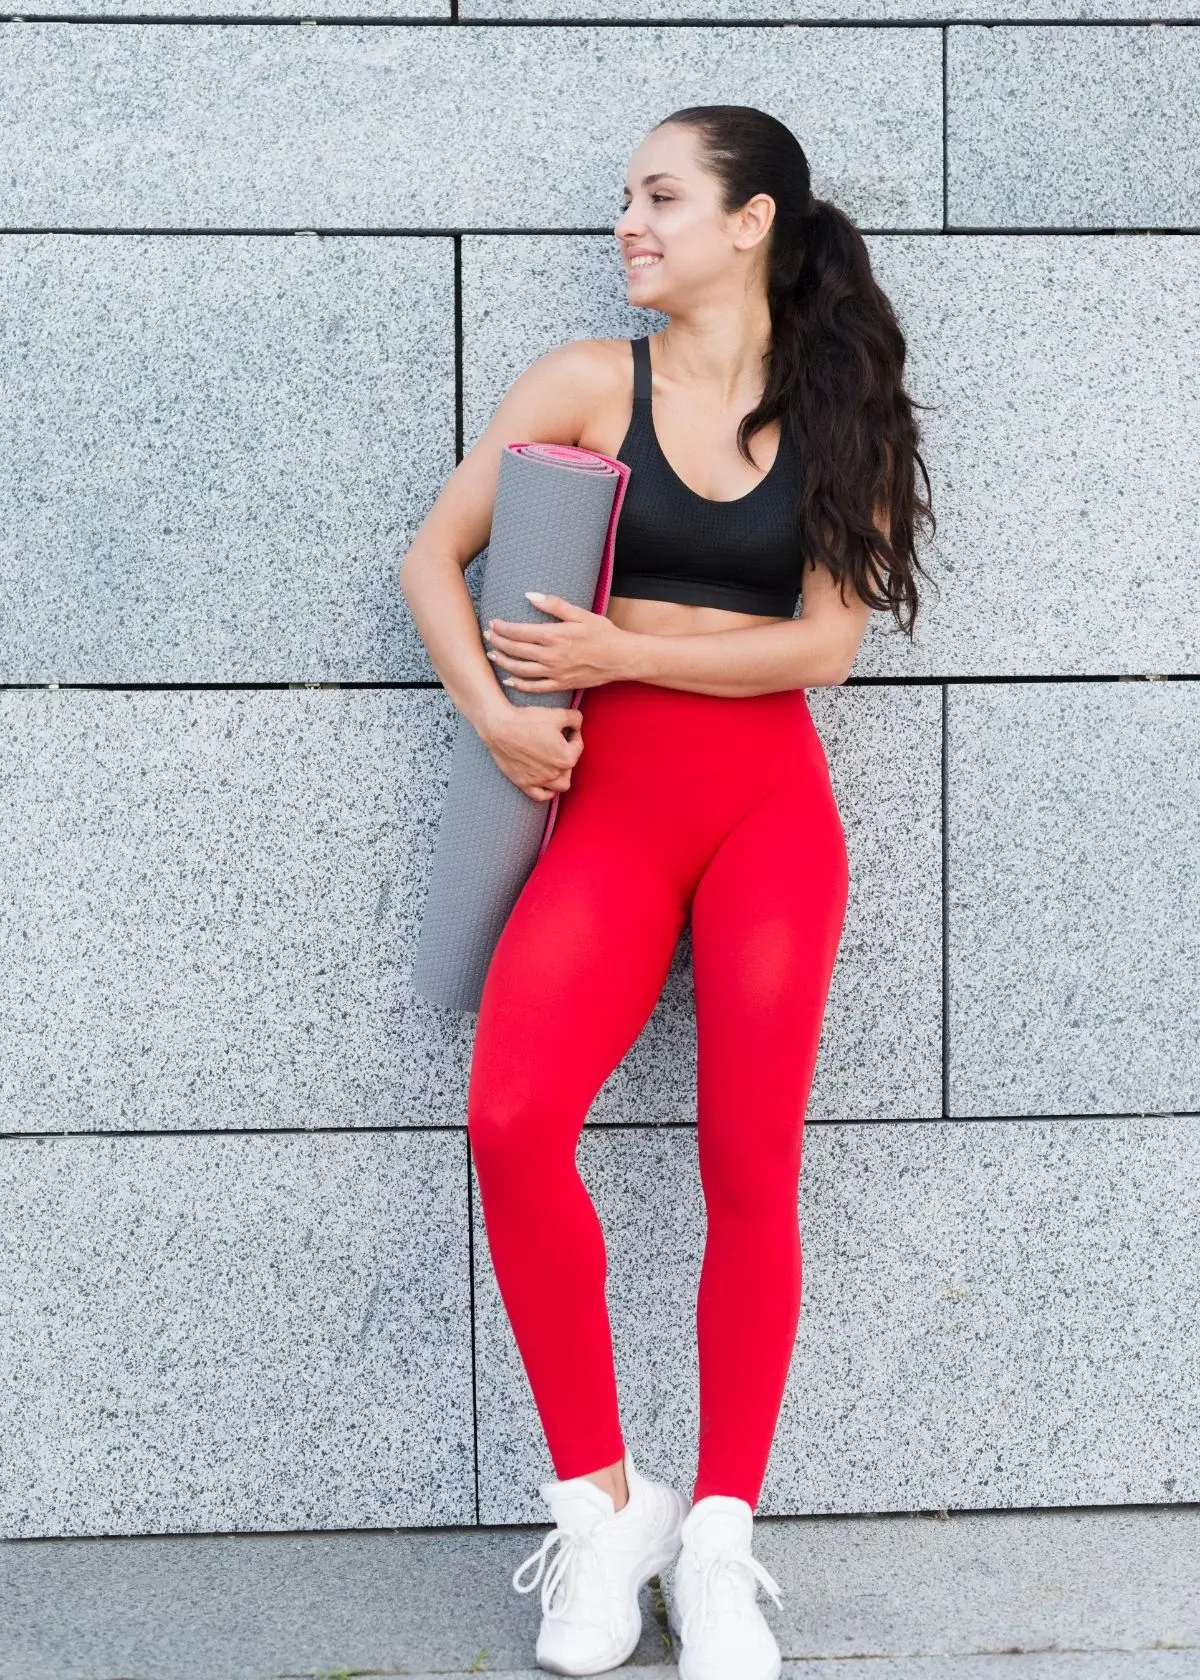 What materials are gym leggings typically made from?